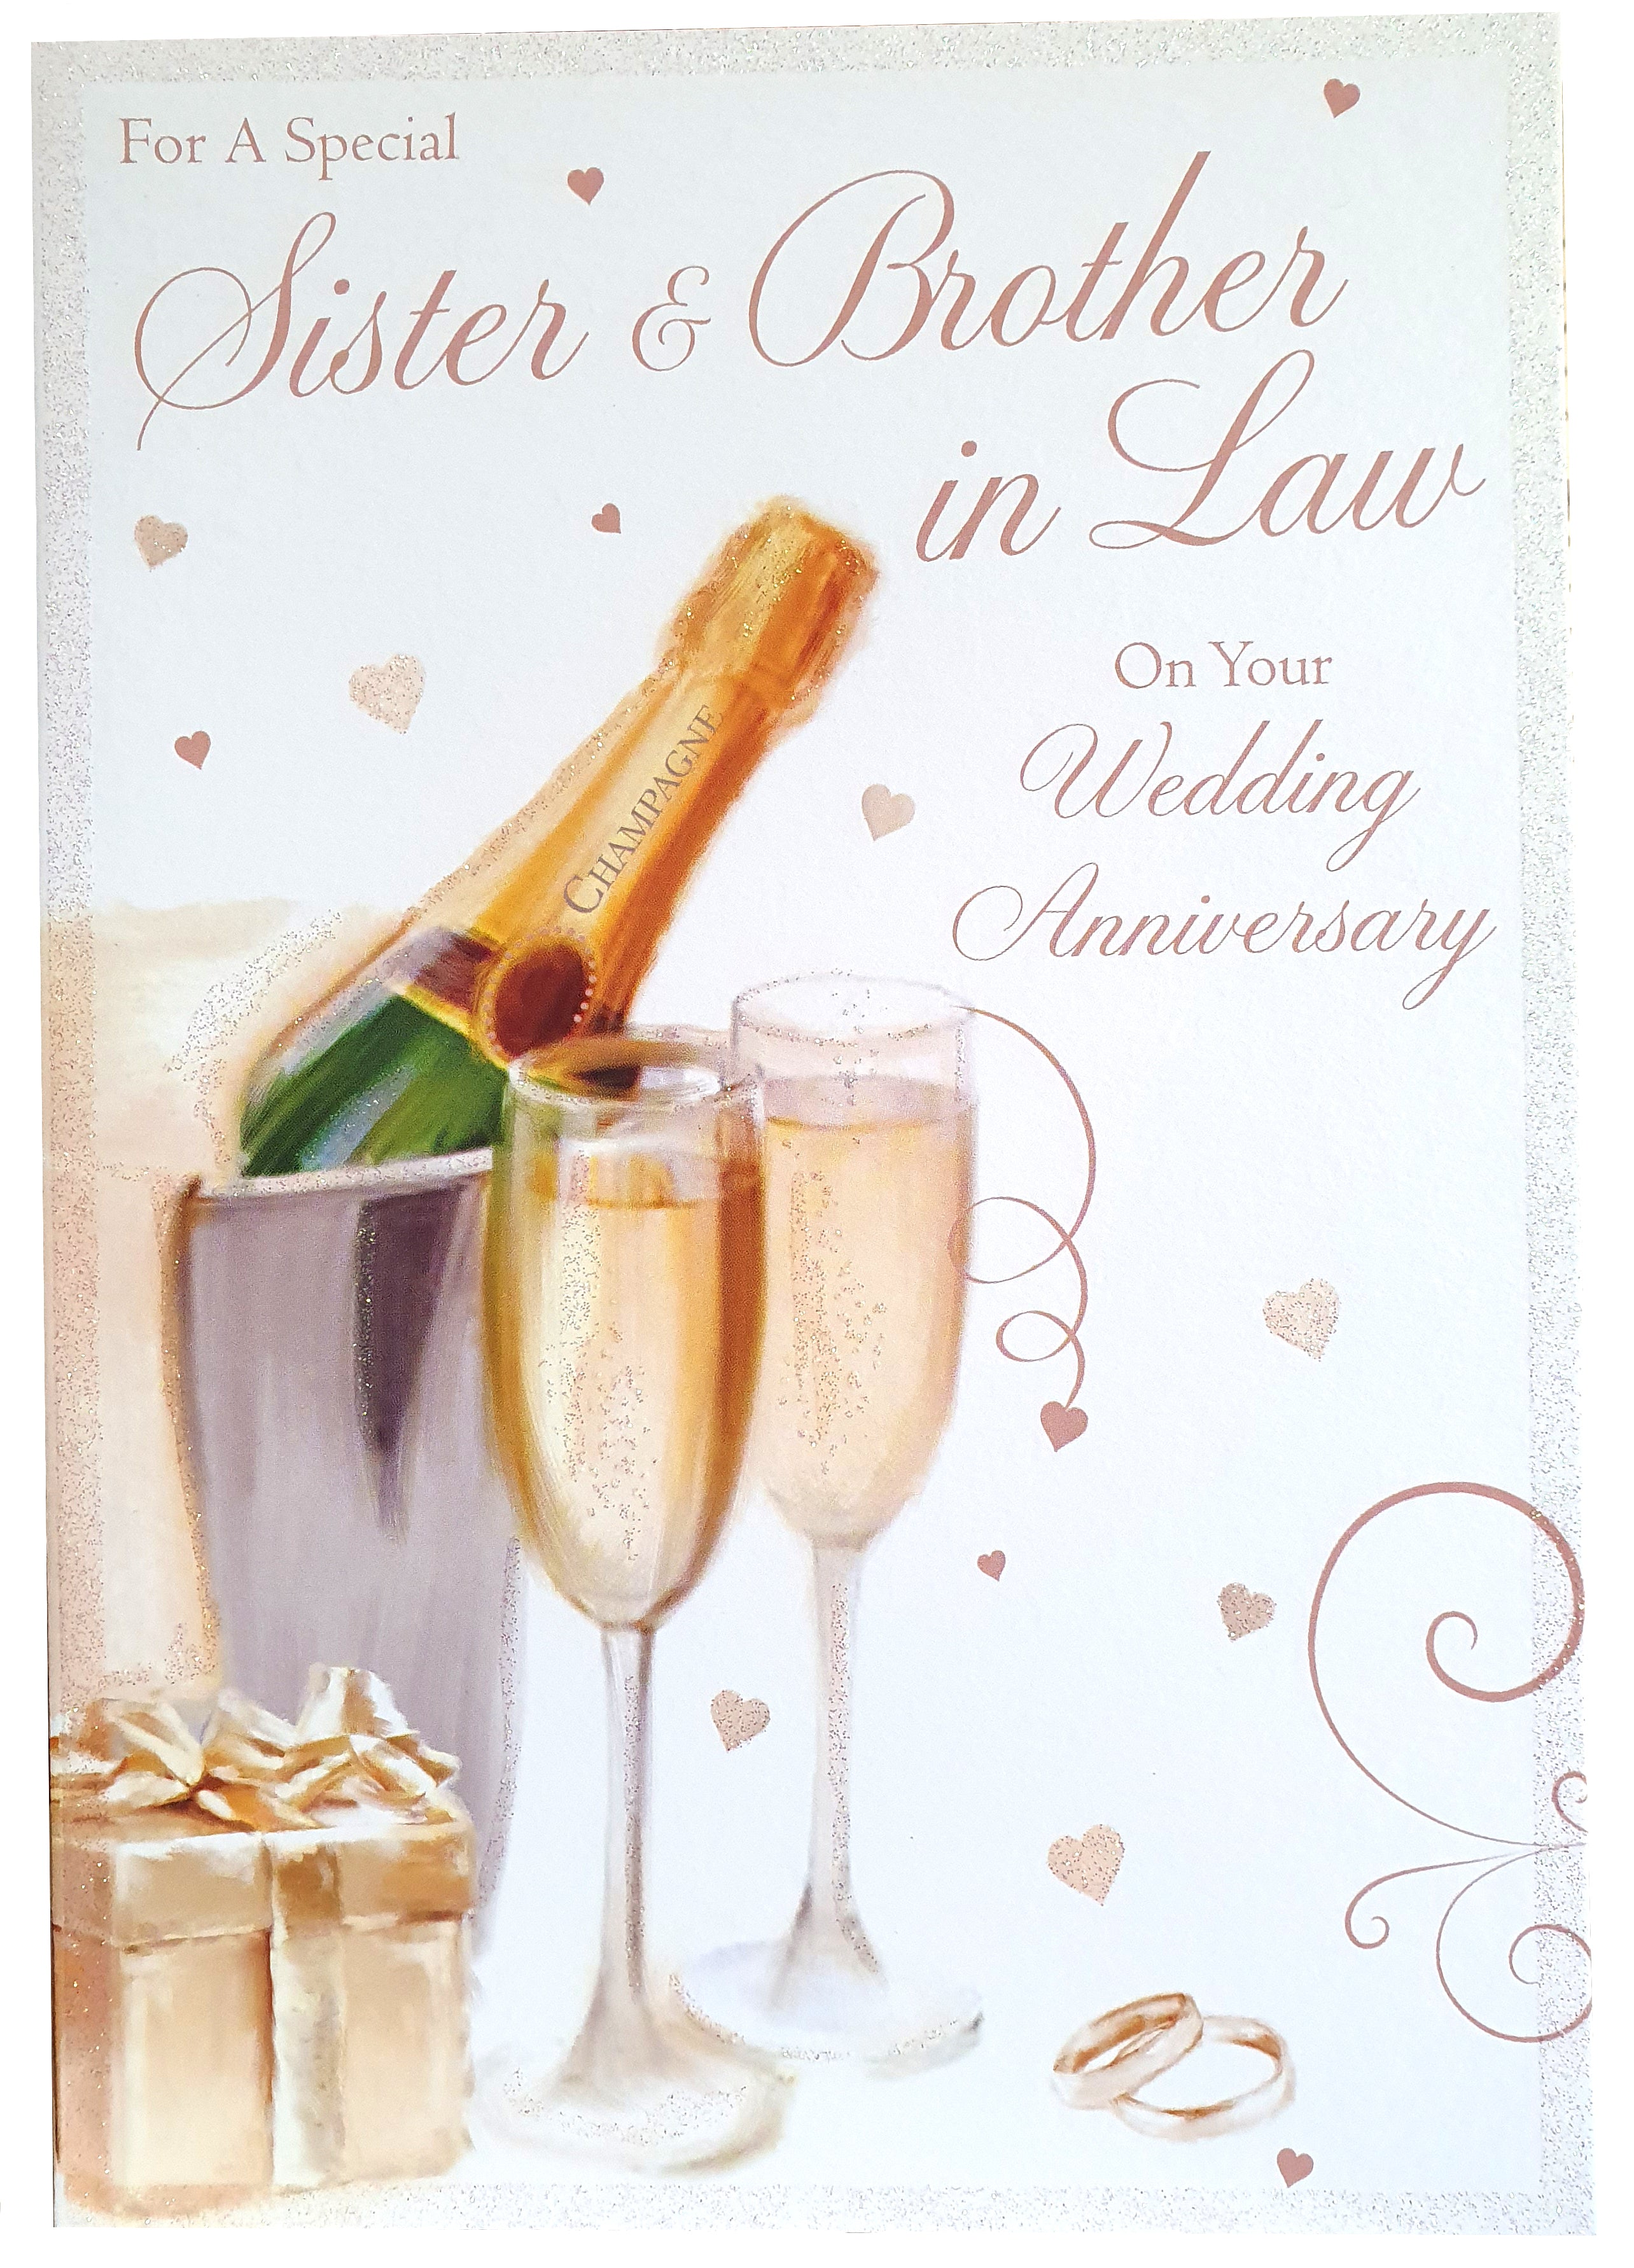 Special Sister and Brother in Law On Your Anniversary Card